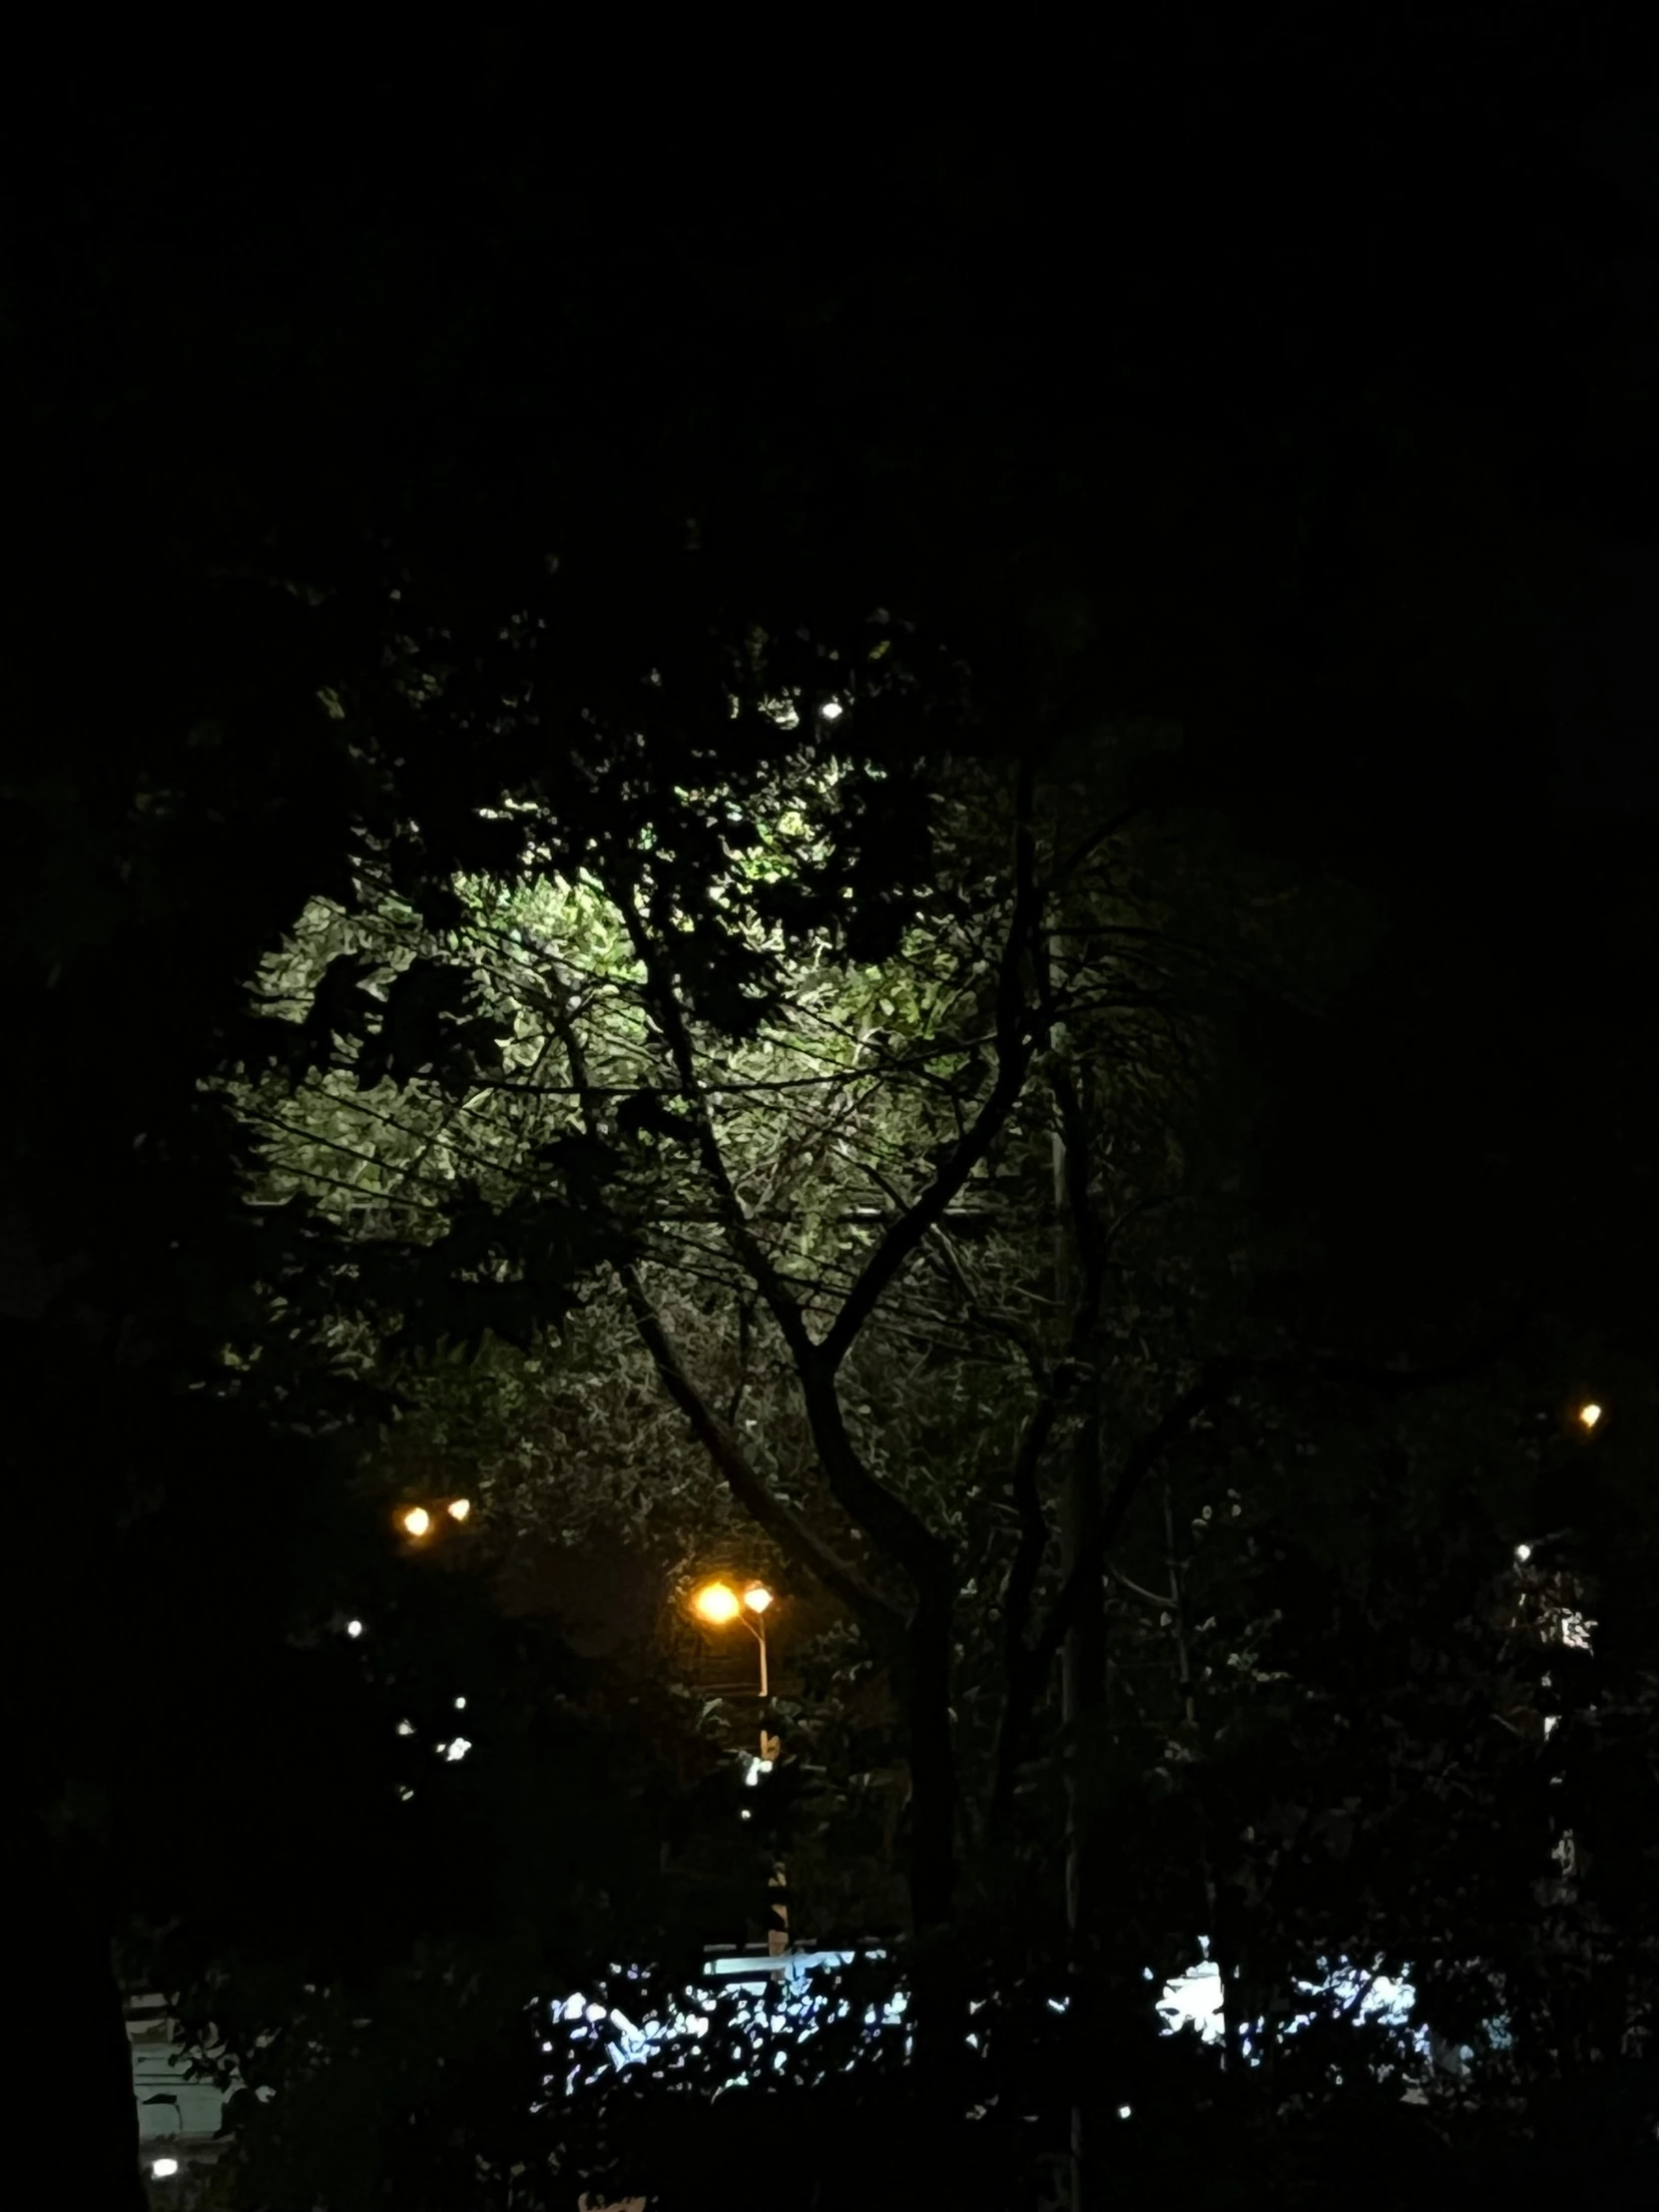 night time picture of a street light in the dark